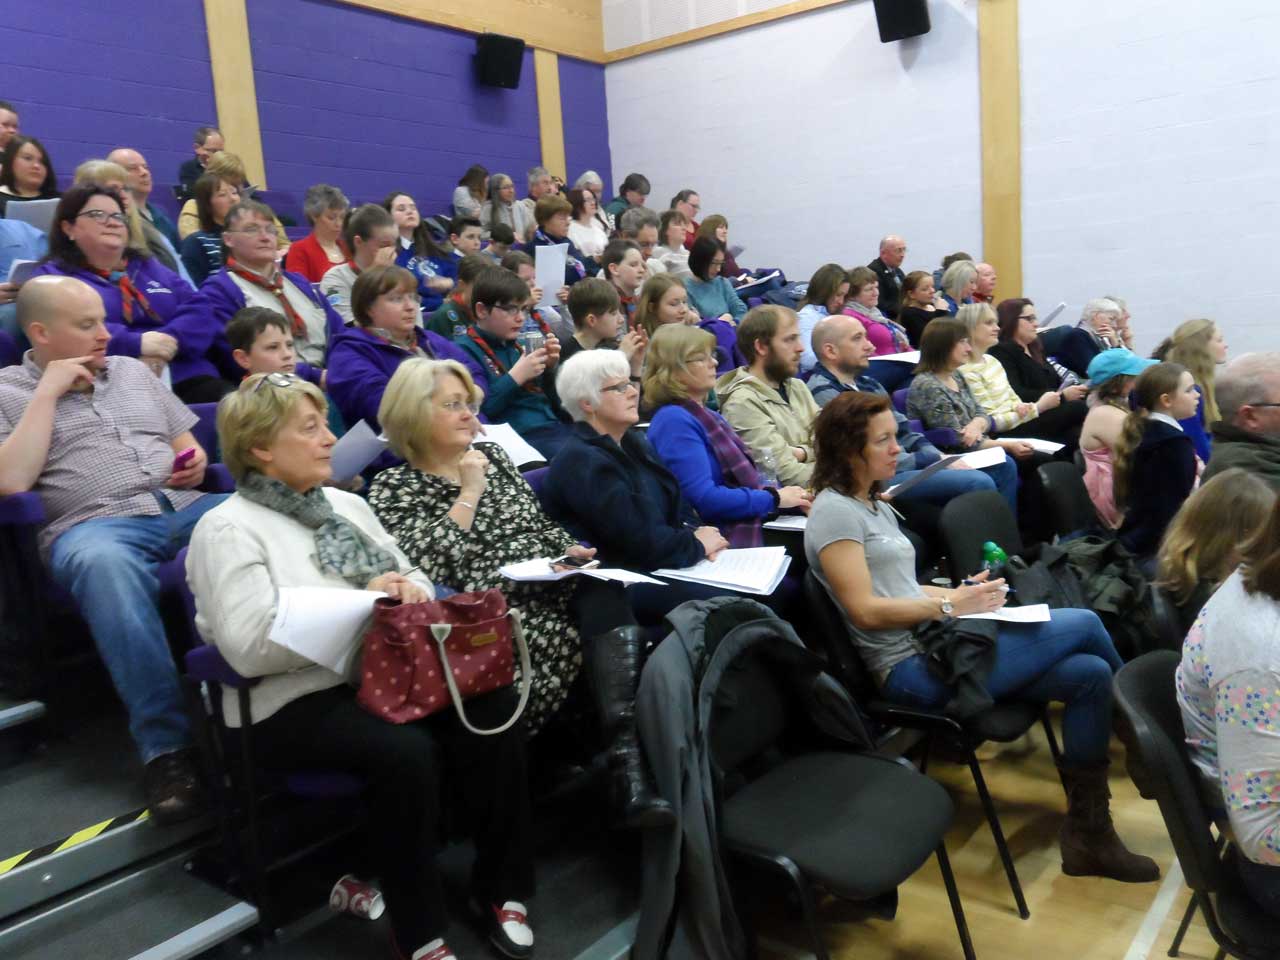 Photo: Your Cash Your Caithness - The Audience